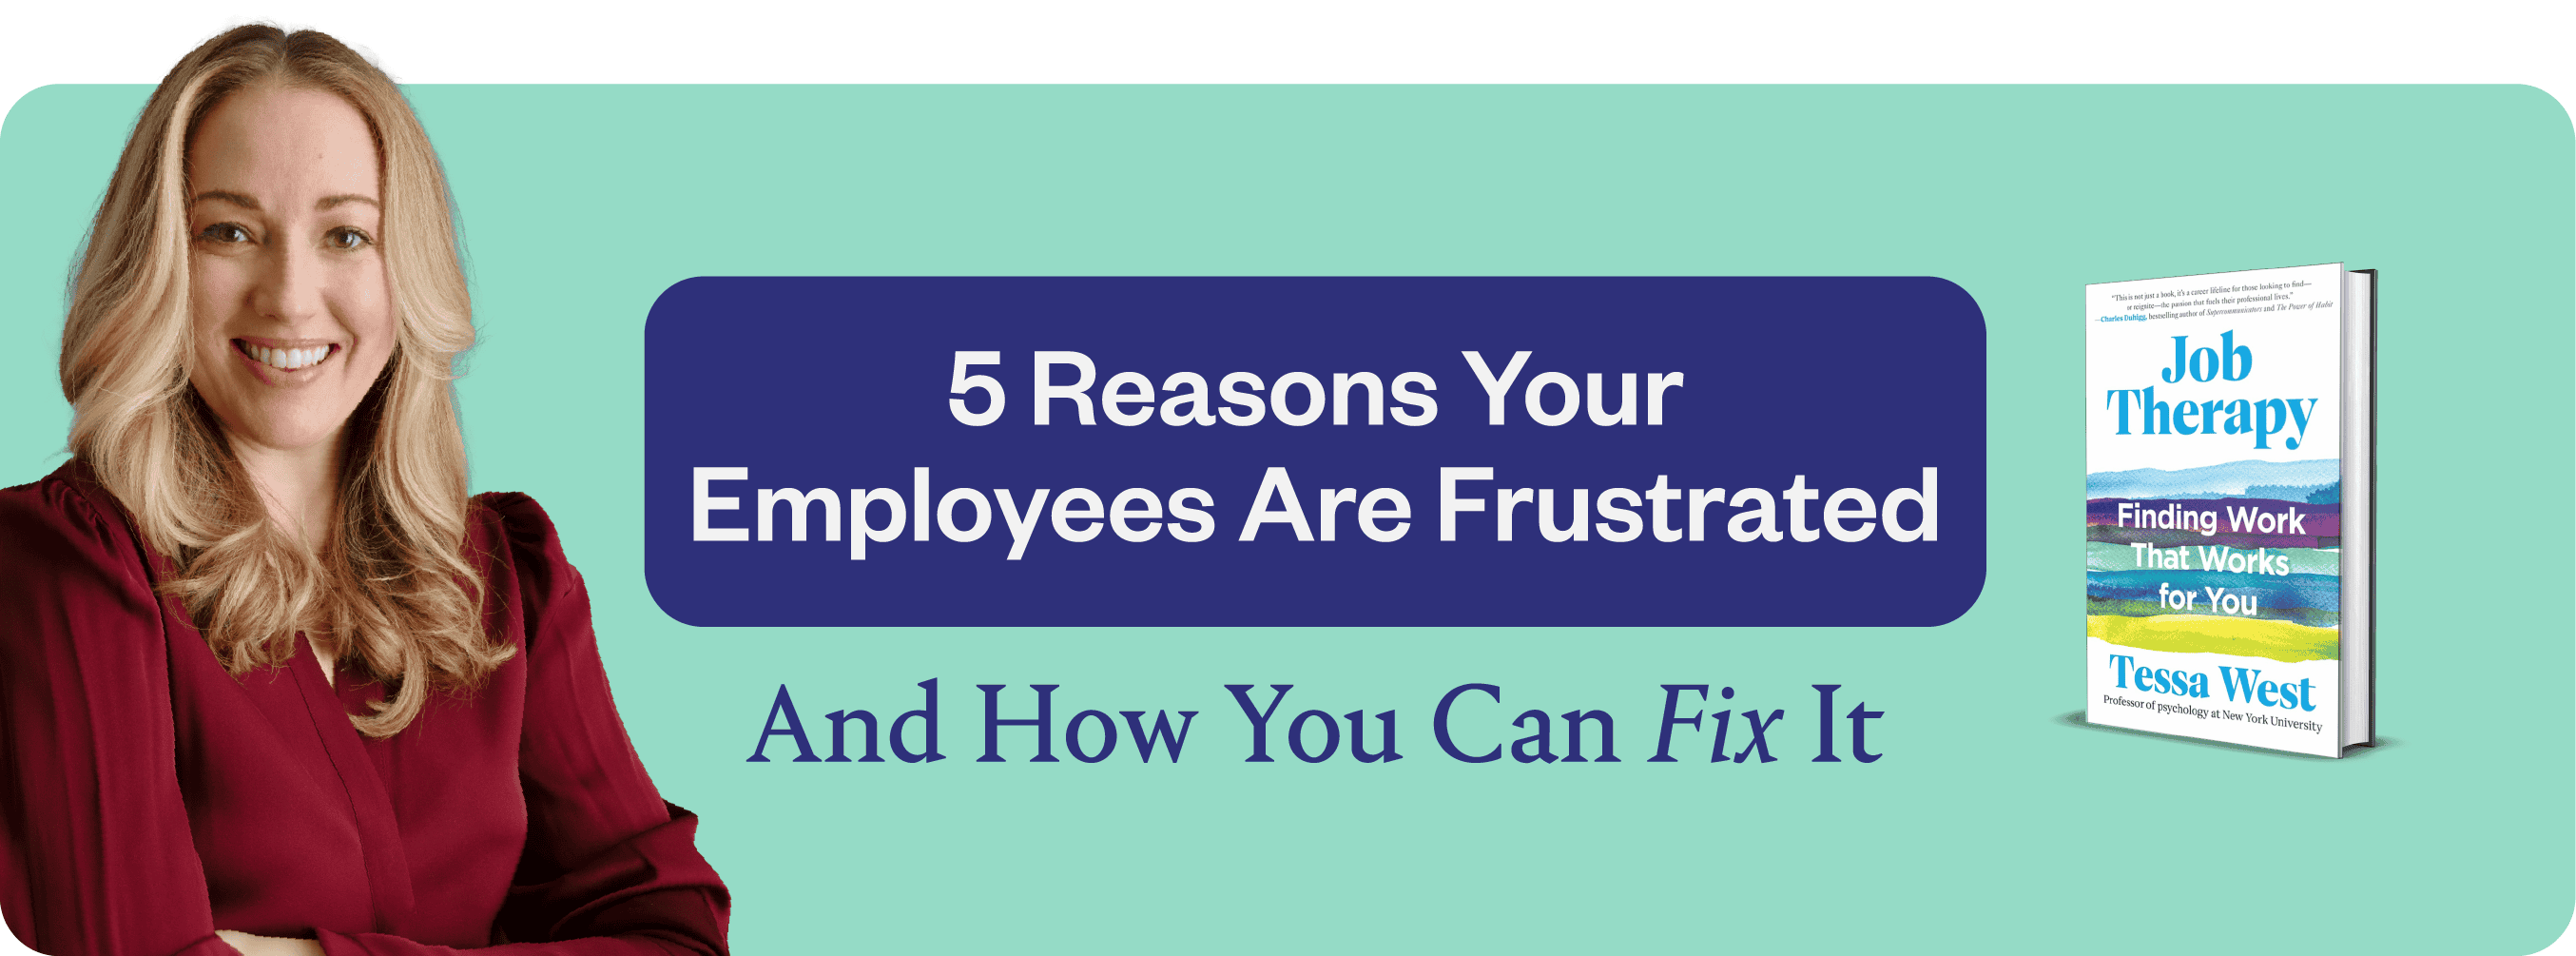 How to Fix the 5 Main Causes of Employee Frustration: An NYU Psychology Prof’s Vital New Book